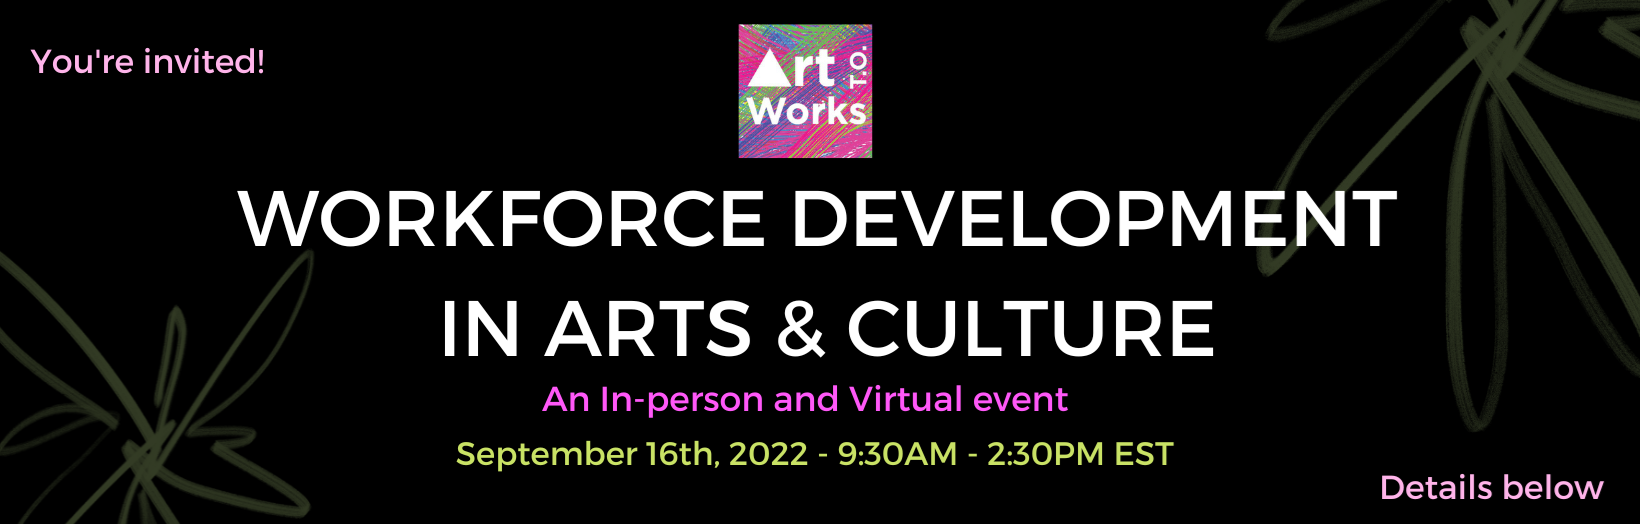 workforce development in arts and culture text on black background